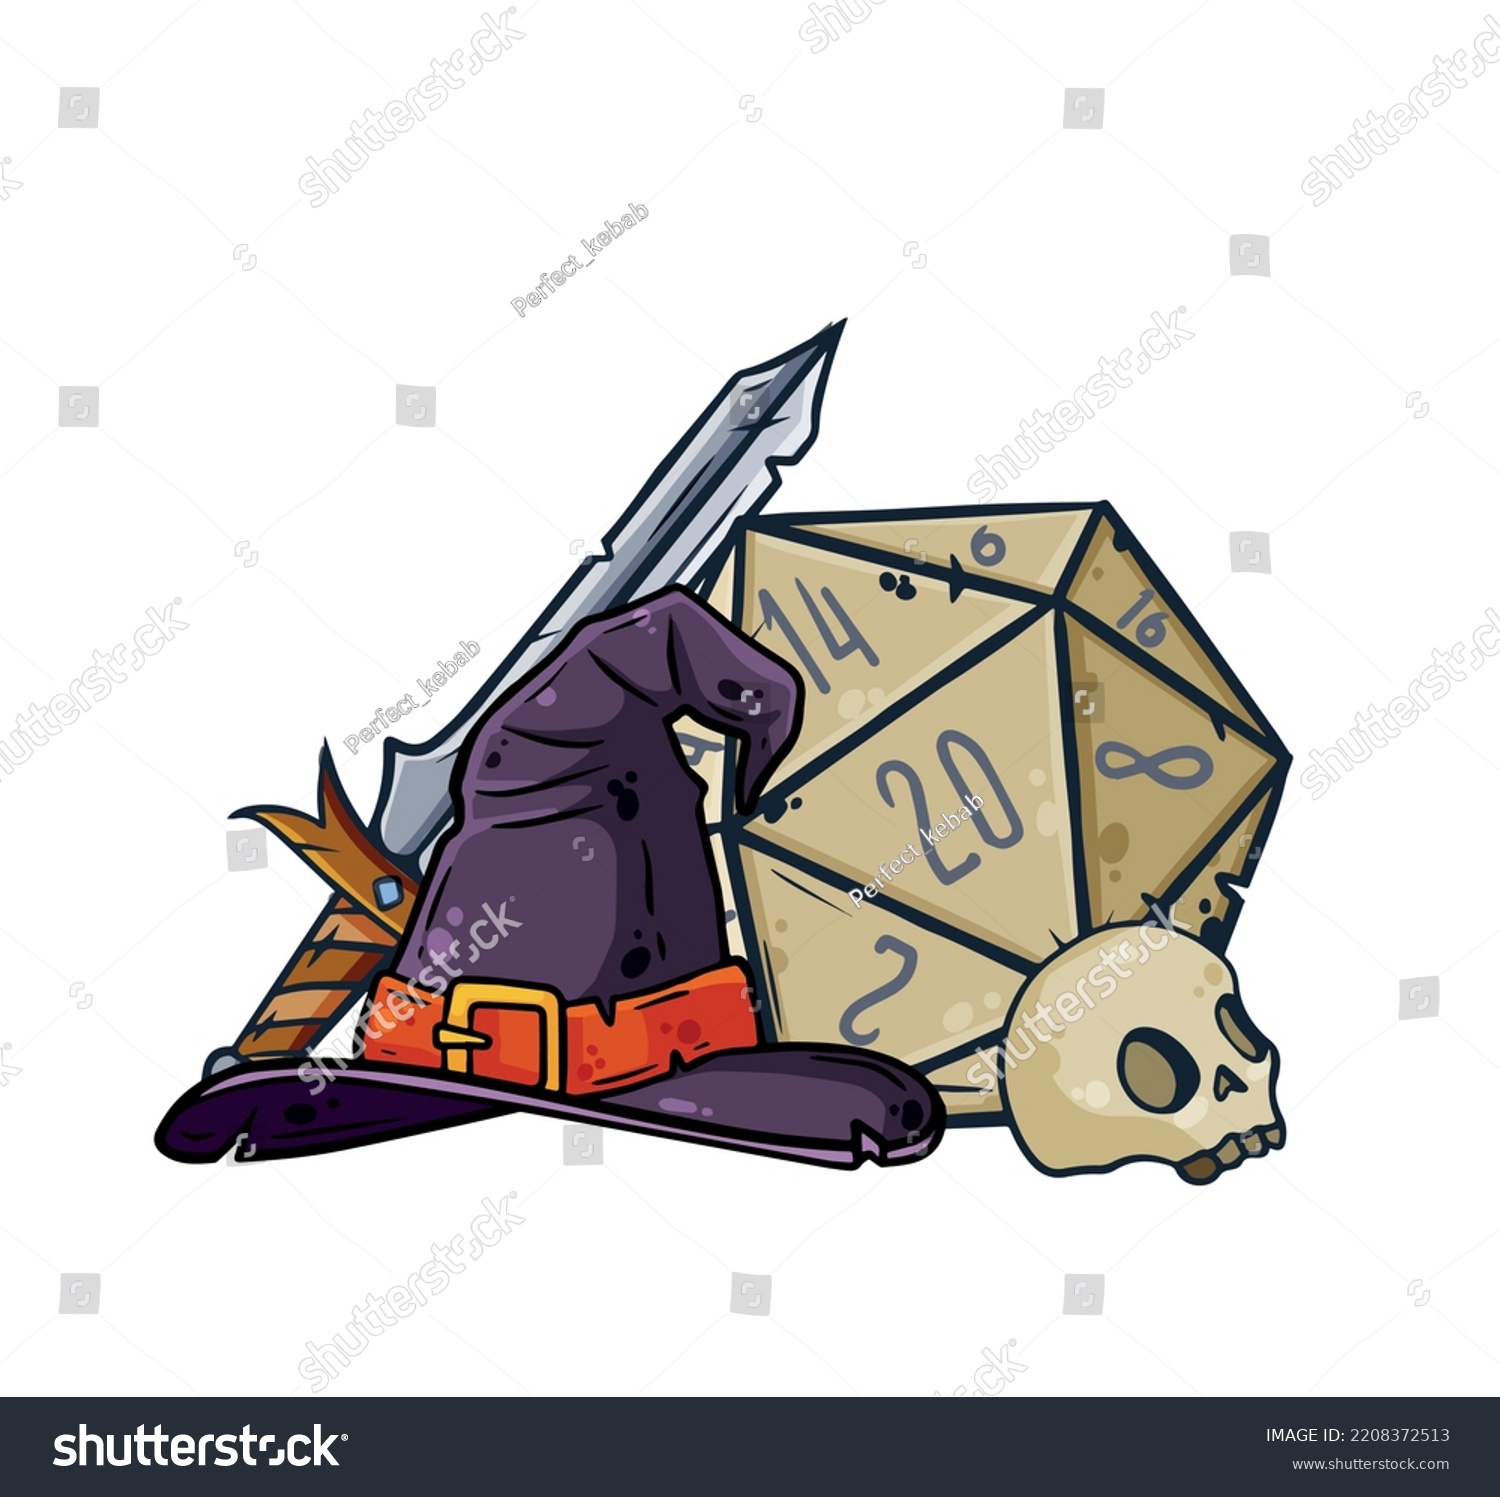 SVG of Dice for playing DnD. Tabletop role-playing game Dungeon and dragons with d20. Magical role of sorcerer with witch hat. Cartoon illustration svg